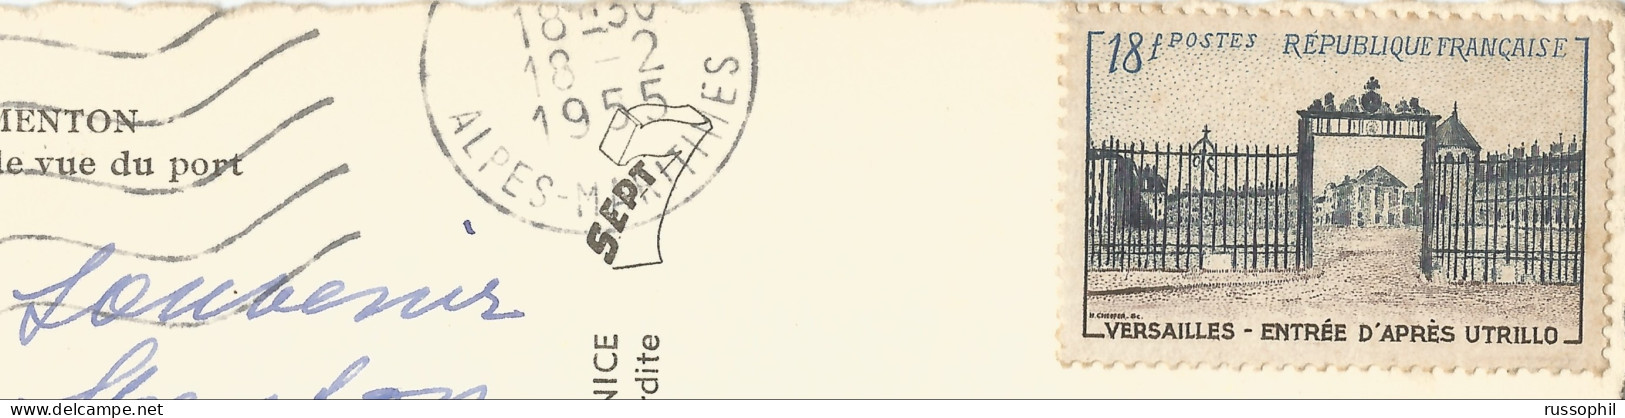 FRANCE -  VARIETY & CURIOSITY - Yv #988 ALONE FRANKING PC TO BELGIUM - PC CIRCULATED BUT STAMP NOT CANCELLED - 1955 - Briefe U. Dokumente